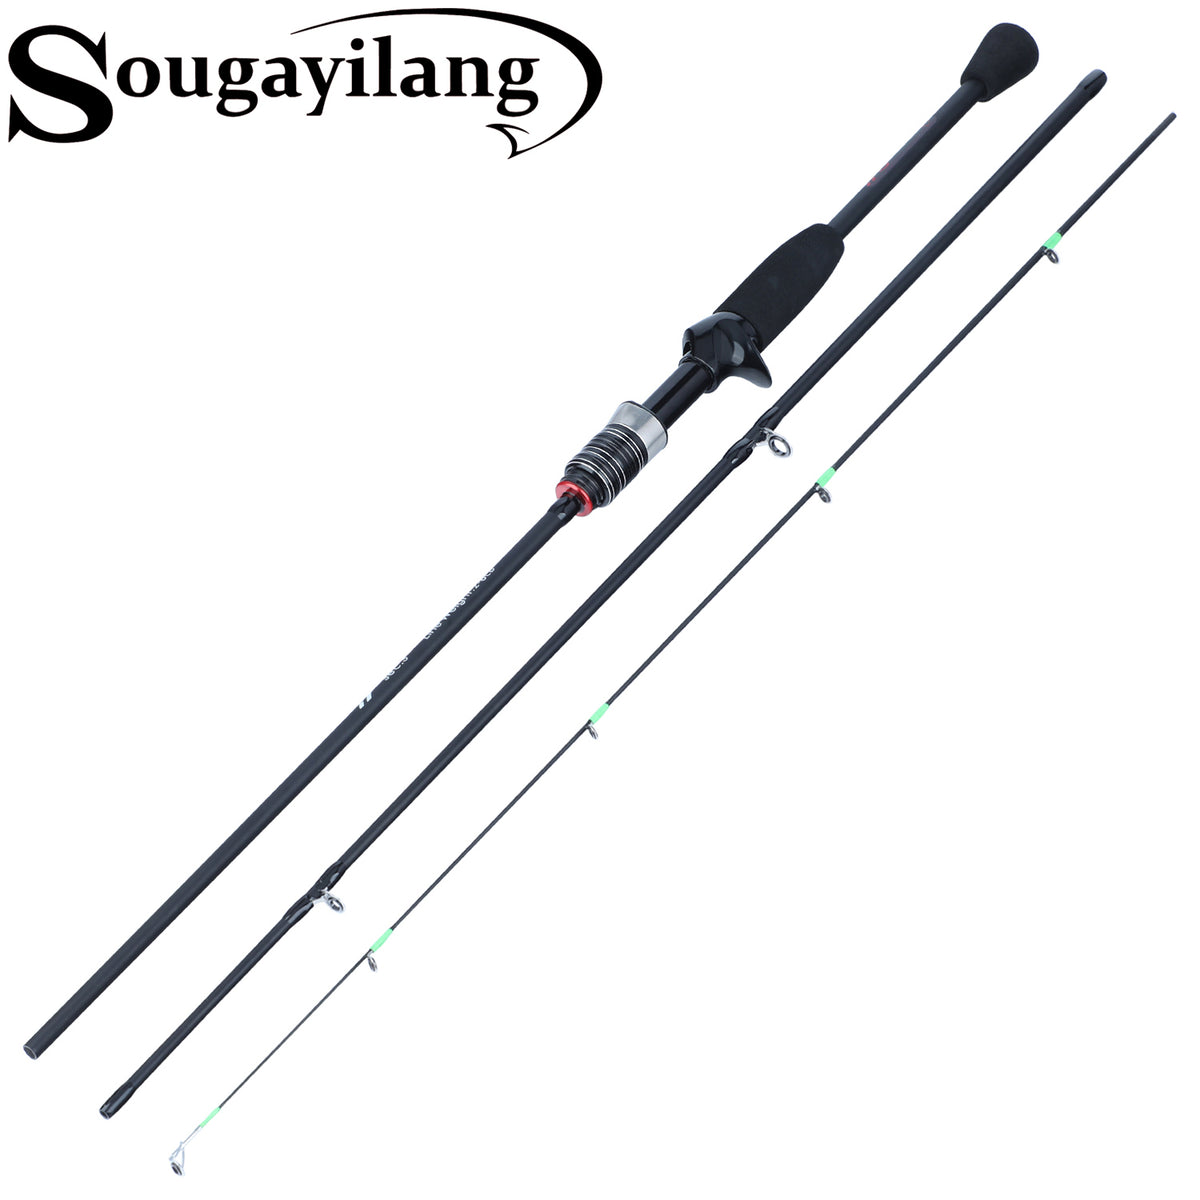 Sougayilang 1.8m Lure Weight 0.8-5g Carbon Fiber Casting Spinning Rod